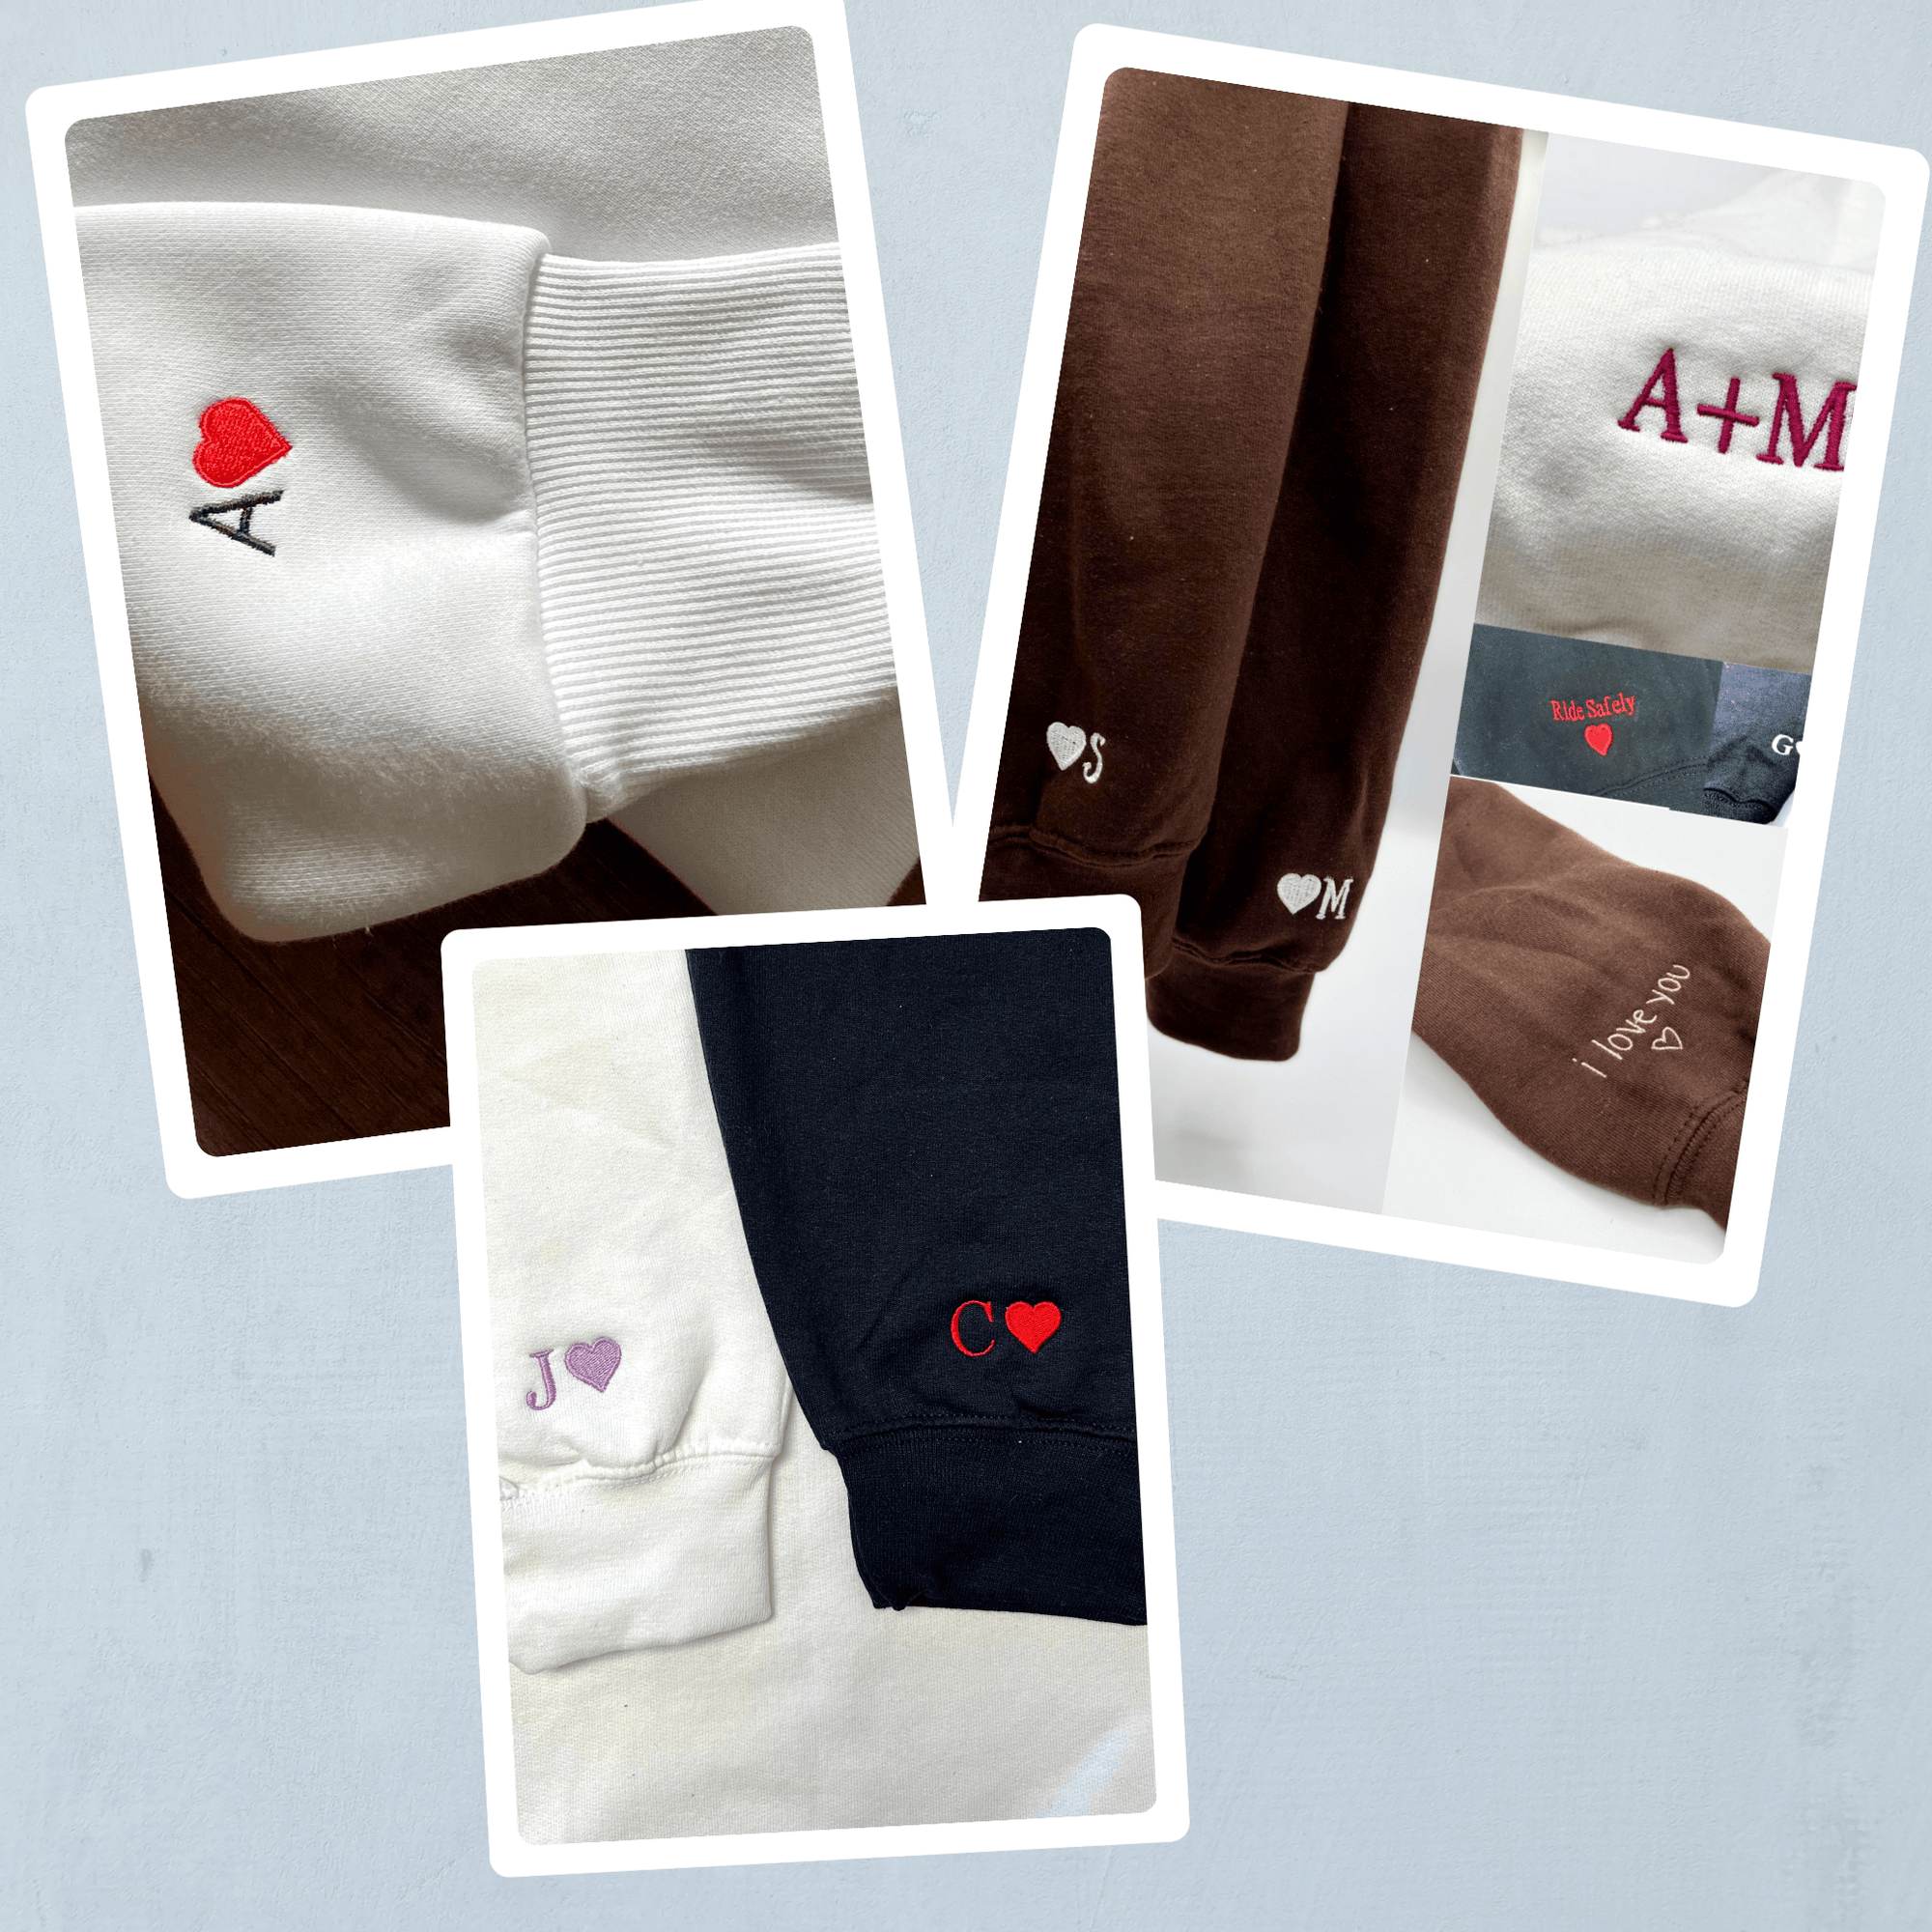 Custom Embroidered Sweatshirts For Couples, Custom Matching Couple Sweatshirt, Cute Dogs Cartoon Couples Embroidered Crewneck Sweater